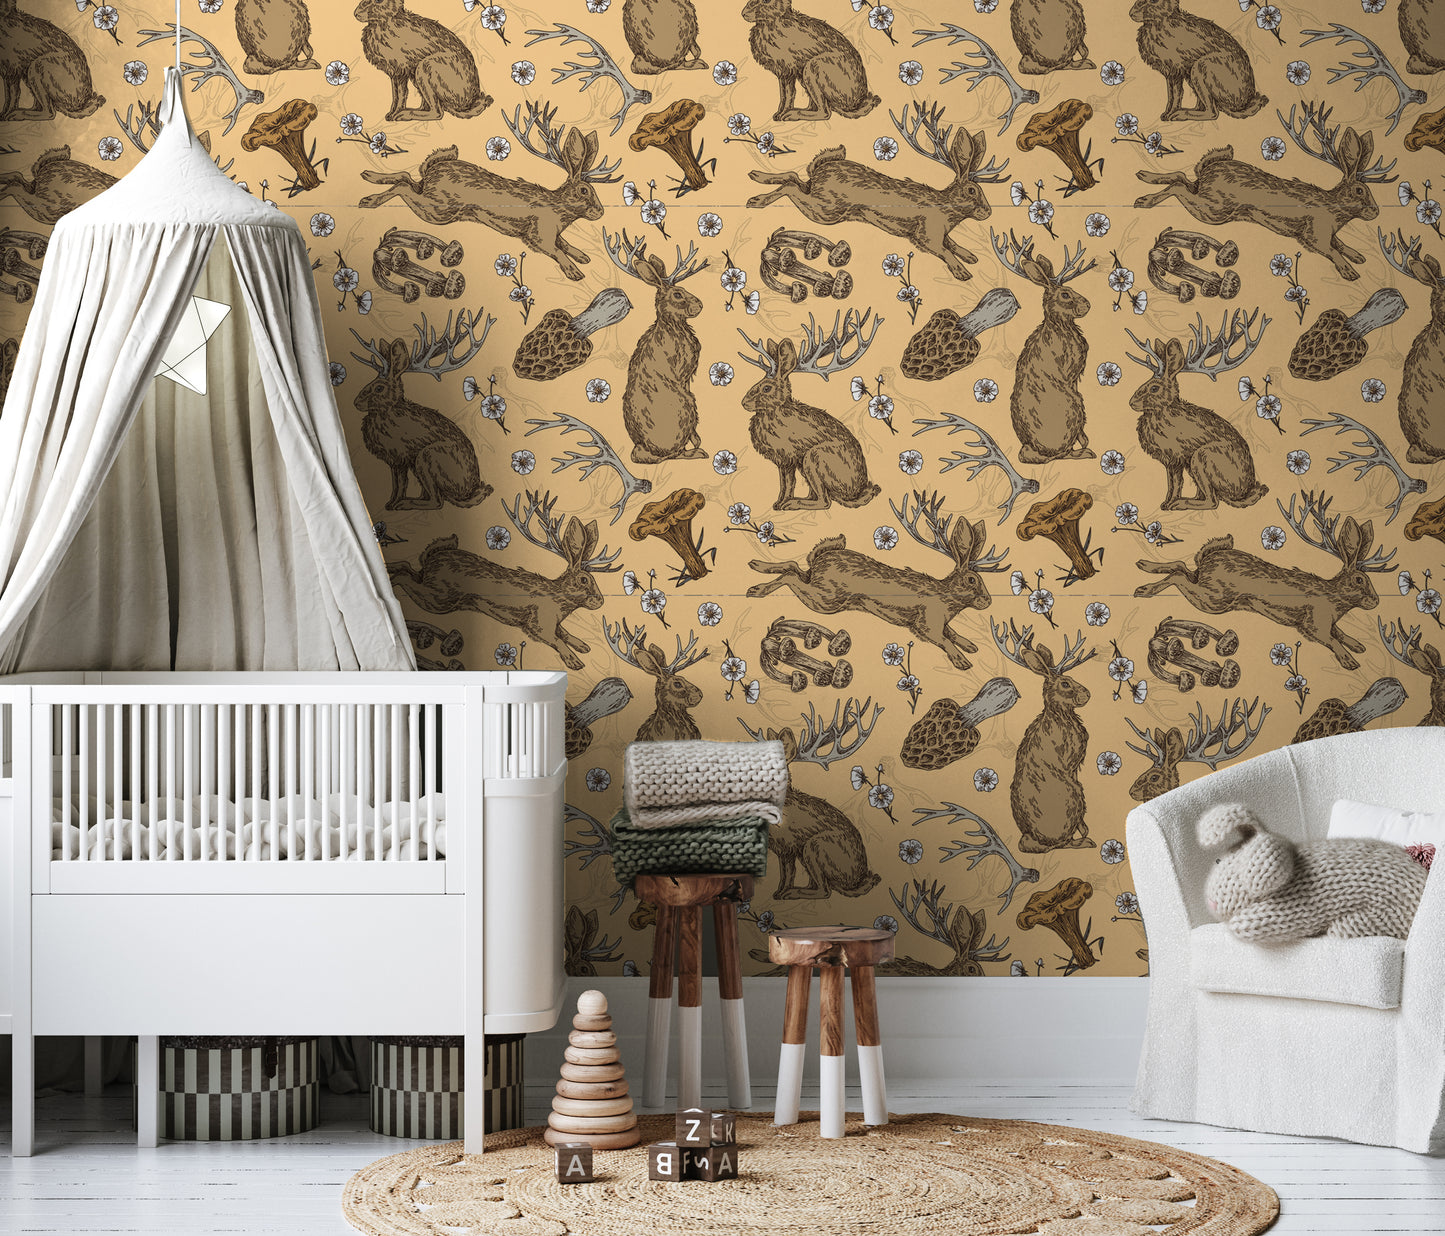 Jackalope And Mushroom Removable Peel And Stick Wallpaper